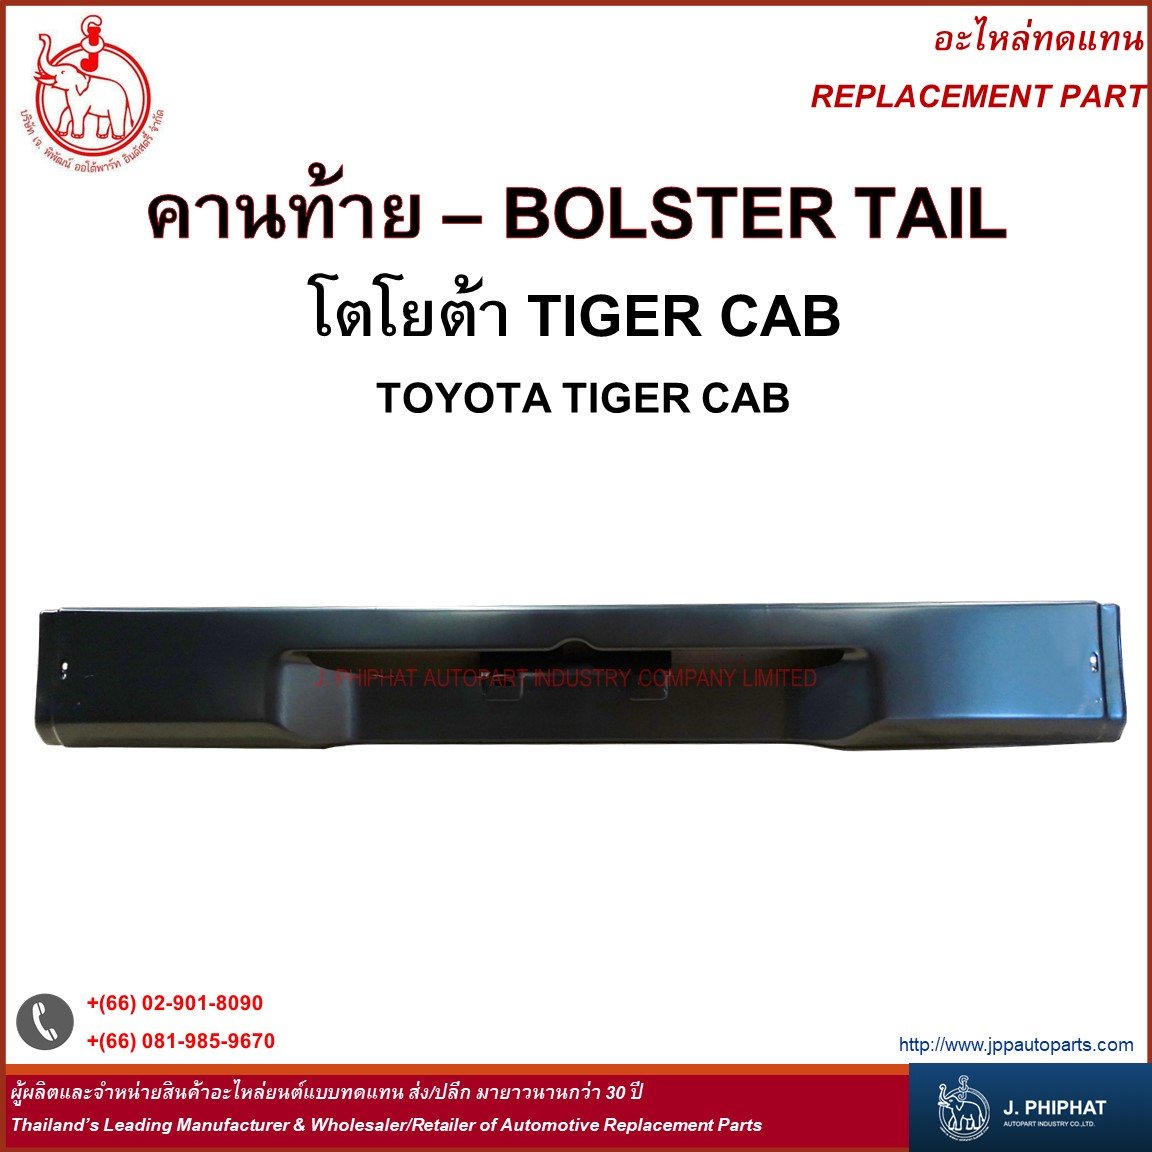 Bolster Tail - Toyota Tiger CAB